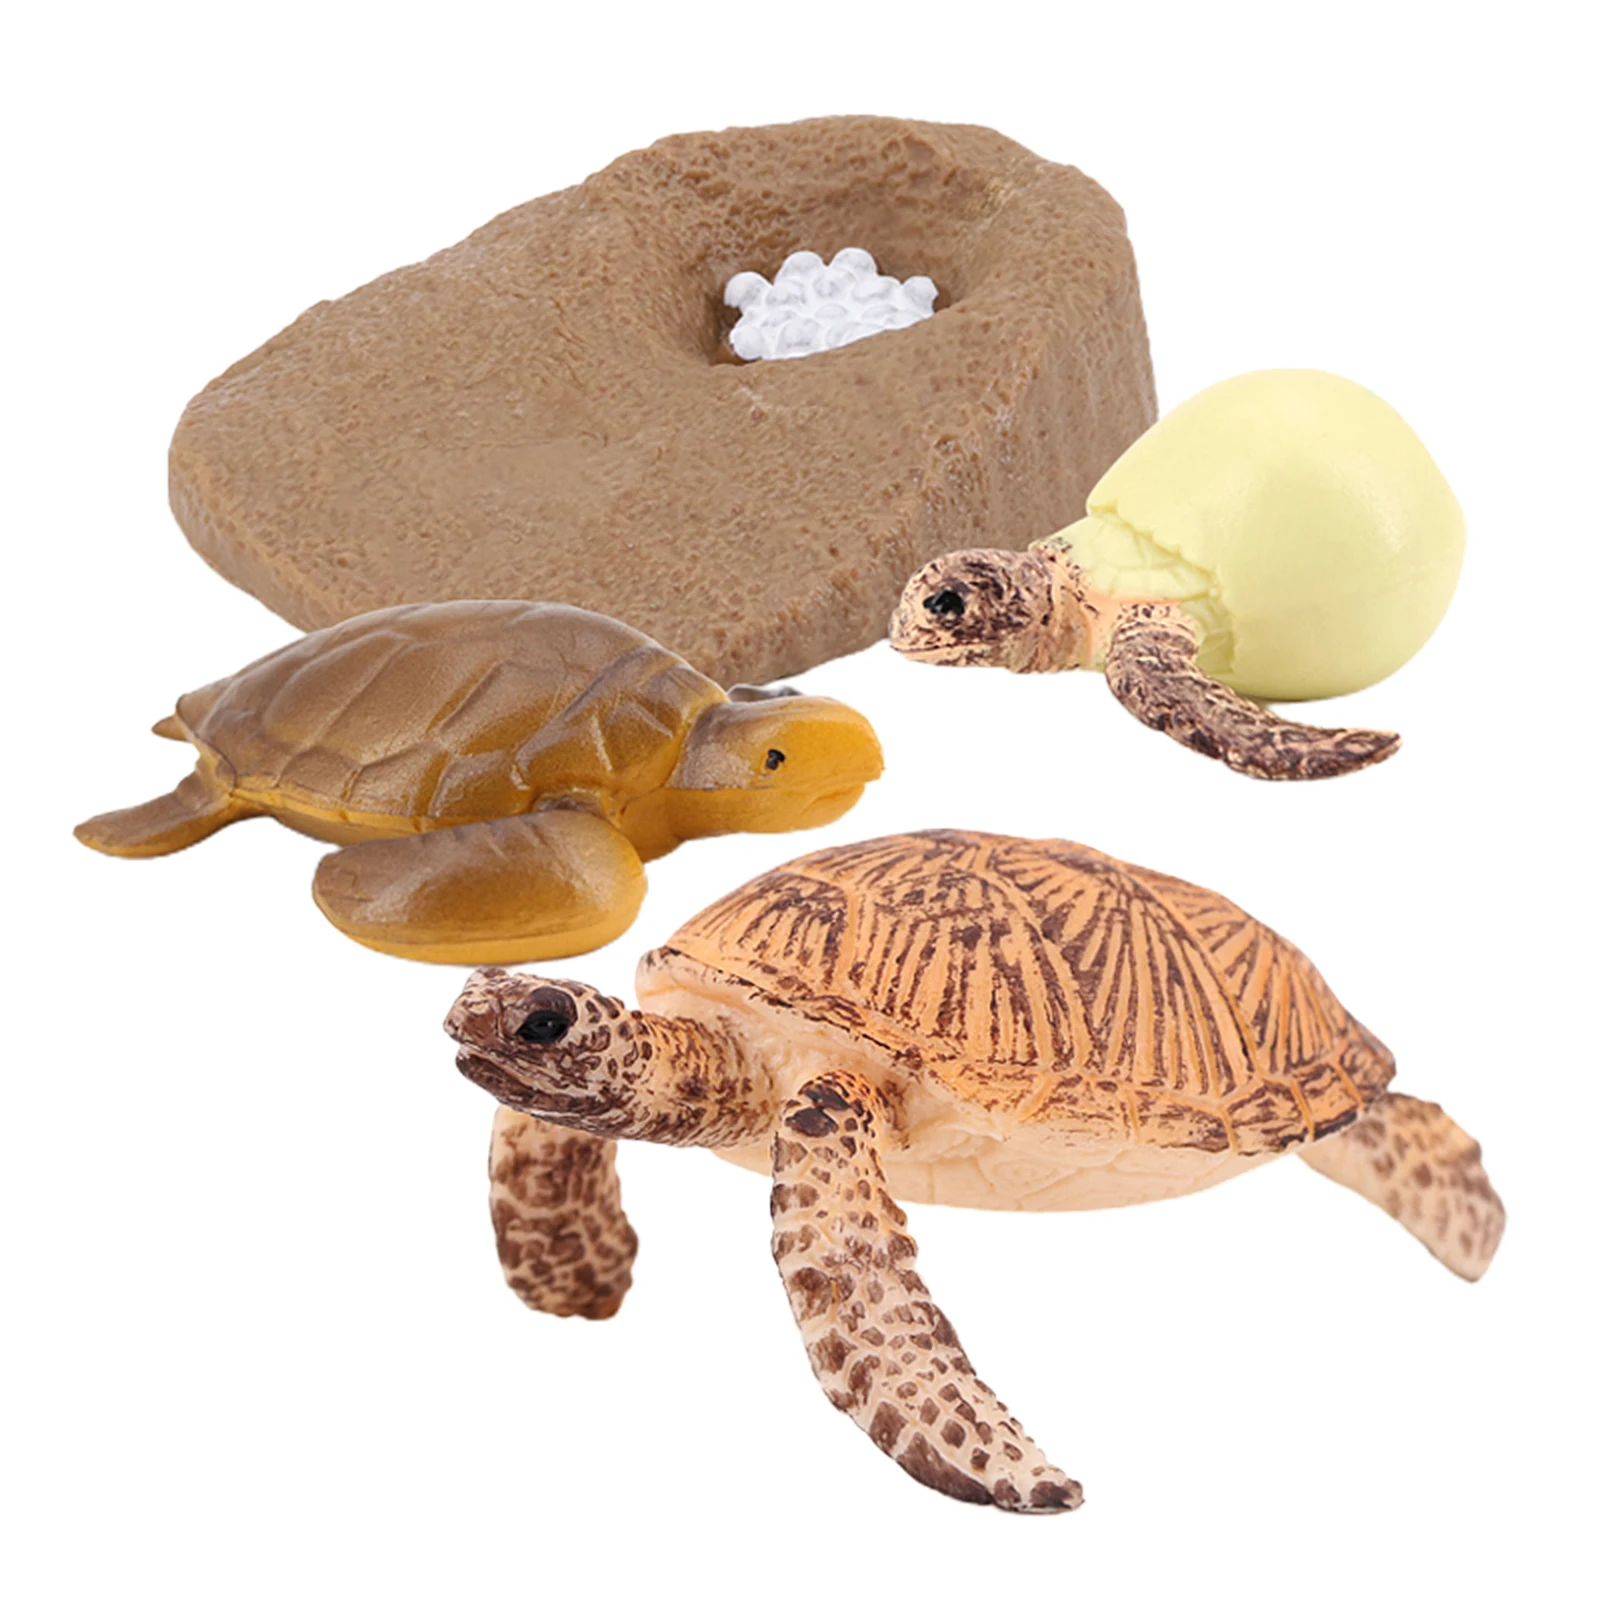 Toy Growth Cycle Life Cycle Model Set Sea Turtle Figures Gifts for Kids 